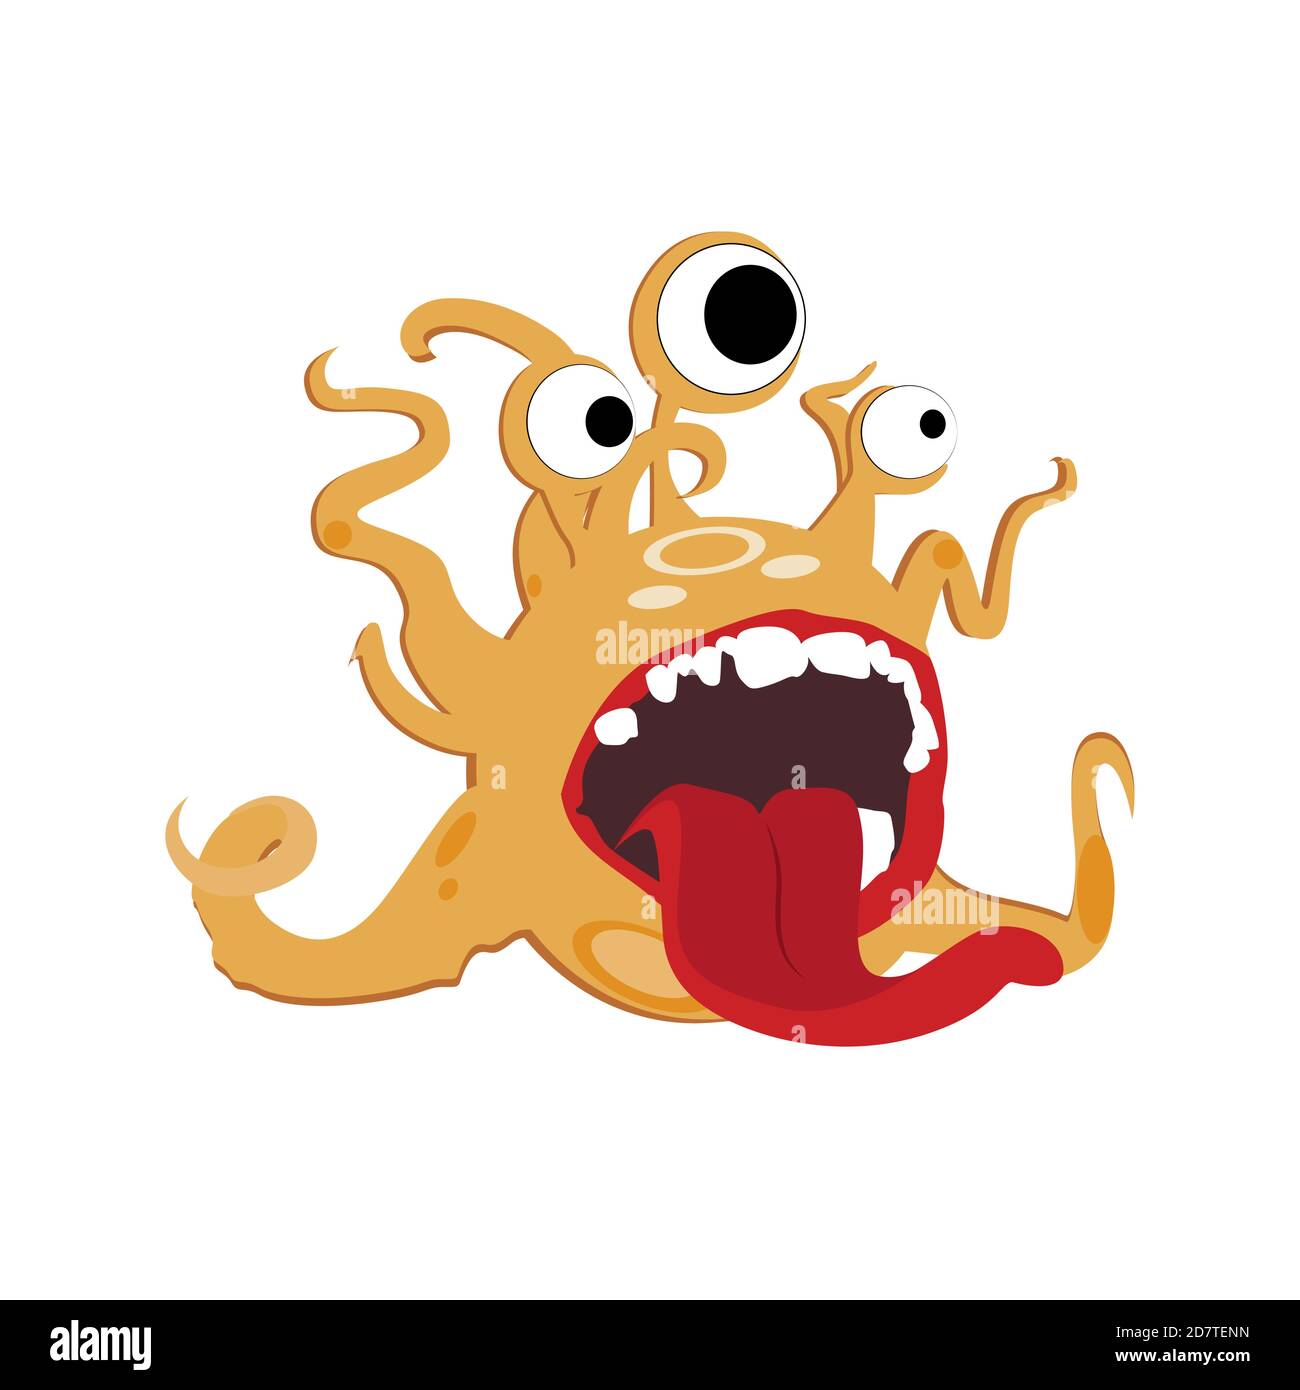 Cute monster with round eyes and tentacles. Funny mascot angry and crazy with open mouth and stick out tongue, screaming face troll. Vector illustrati Stock Vector